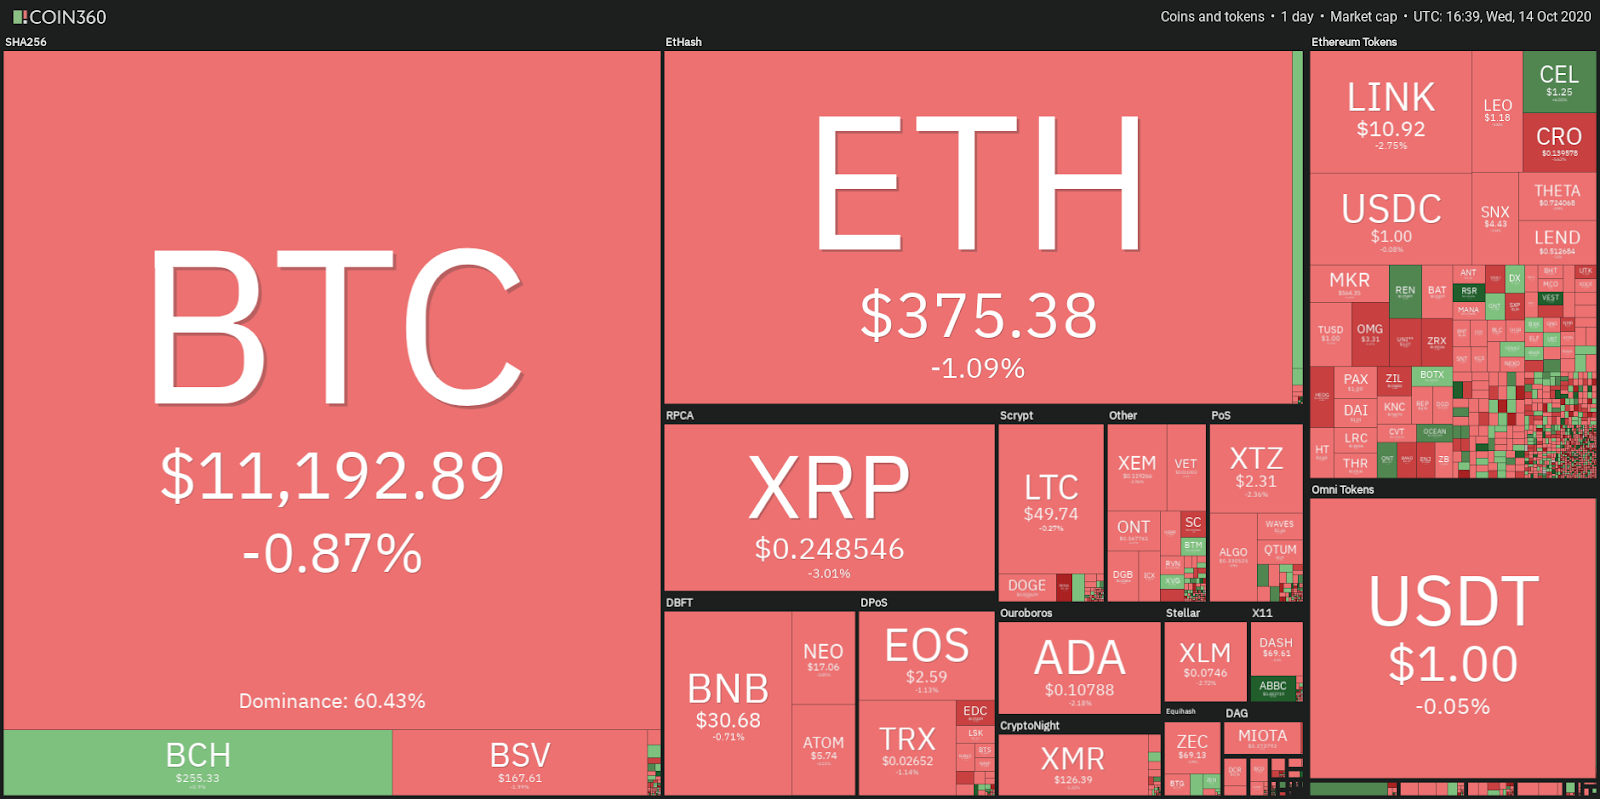 Daily cryptocurrency market performance